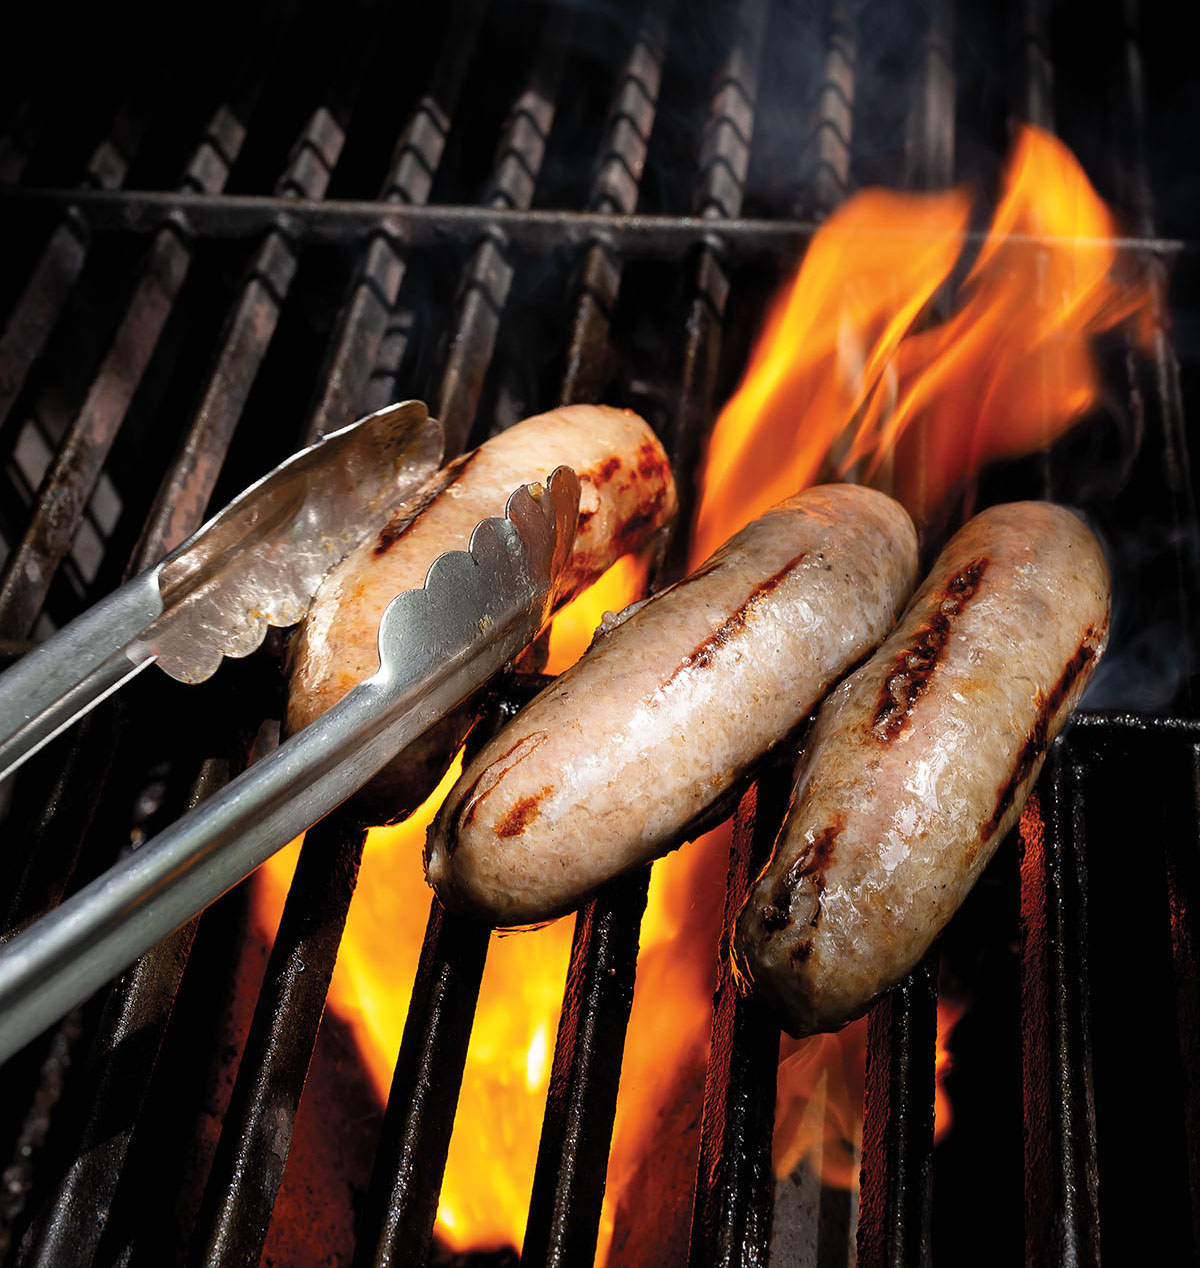 Sausages cook on a flaming grill